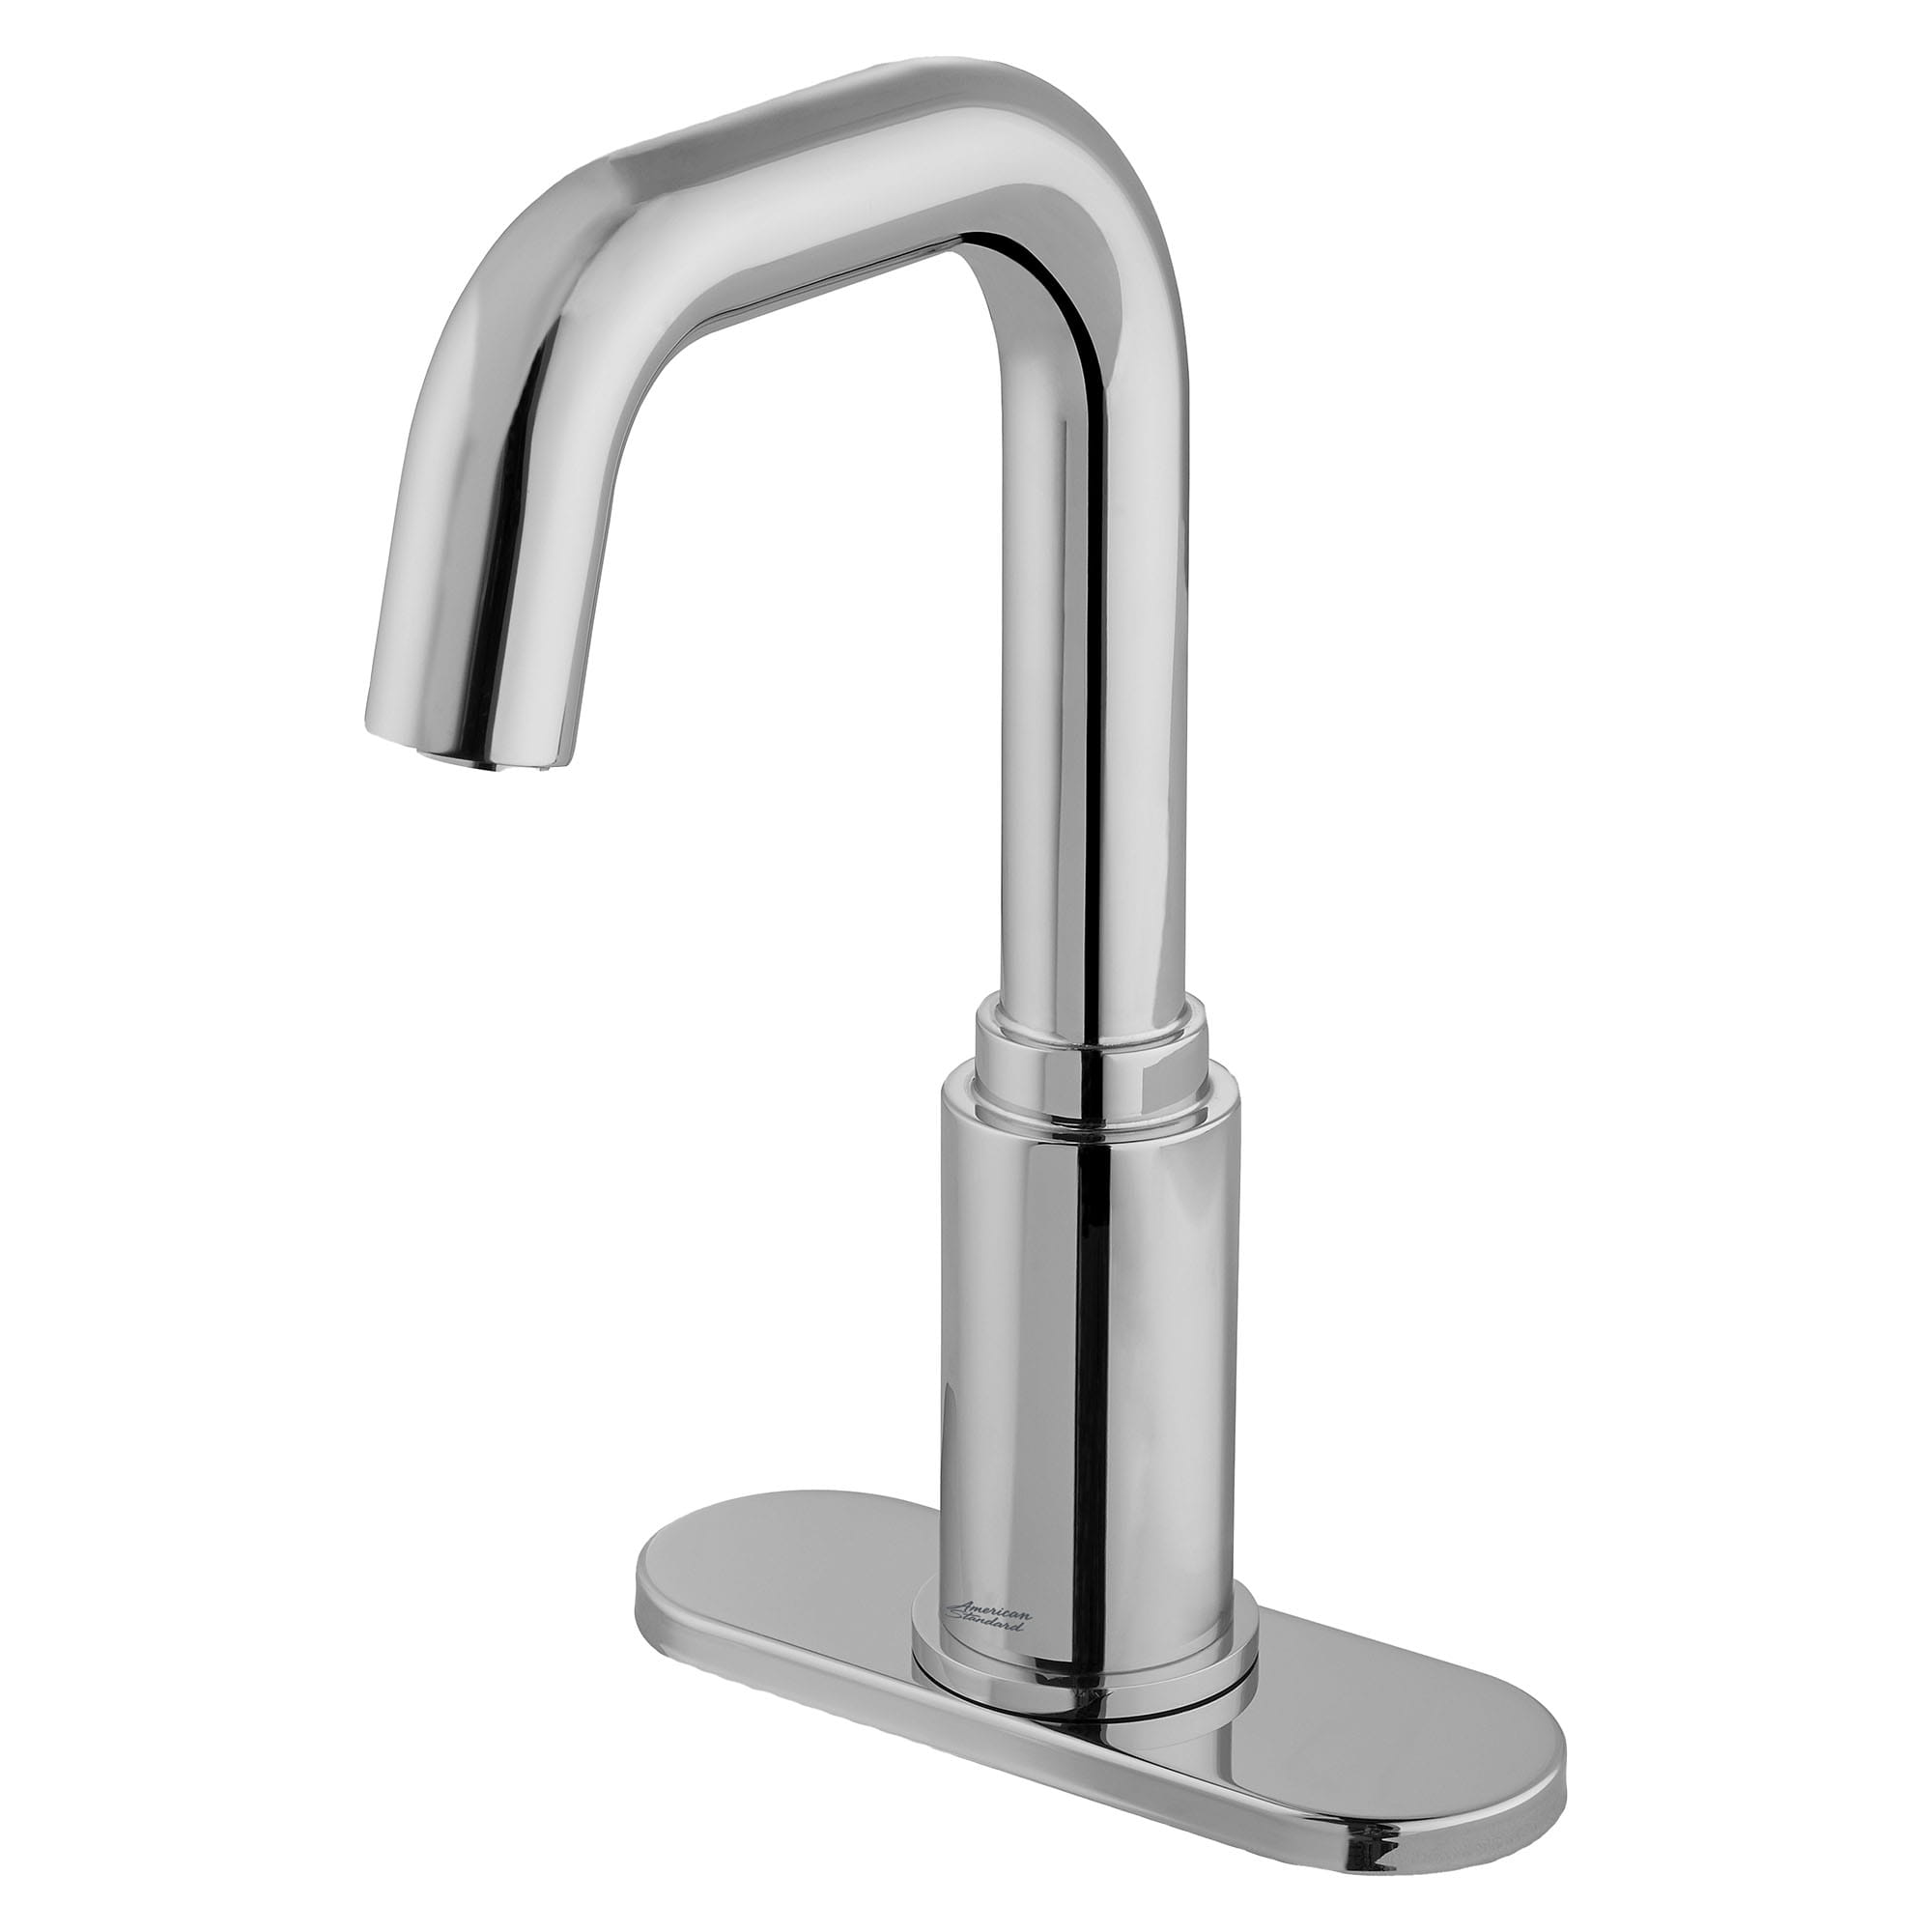 Serin® Touchless Faucet, Battery-Powered, 0.5 gpm/1.9 Lpm